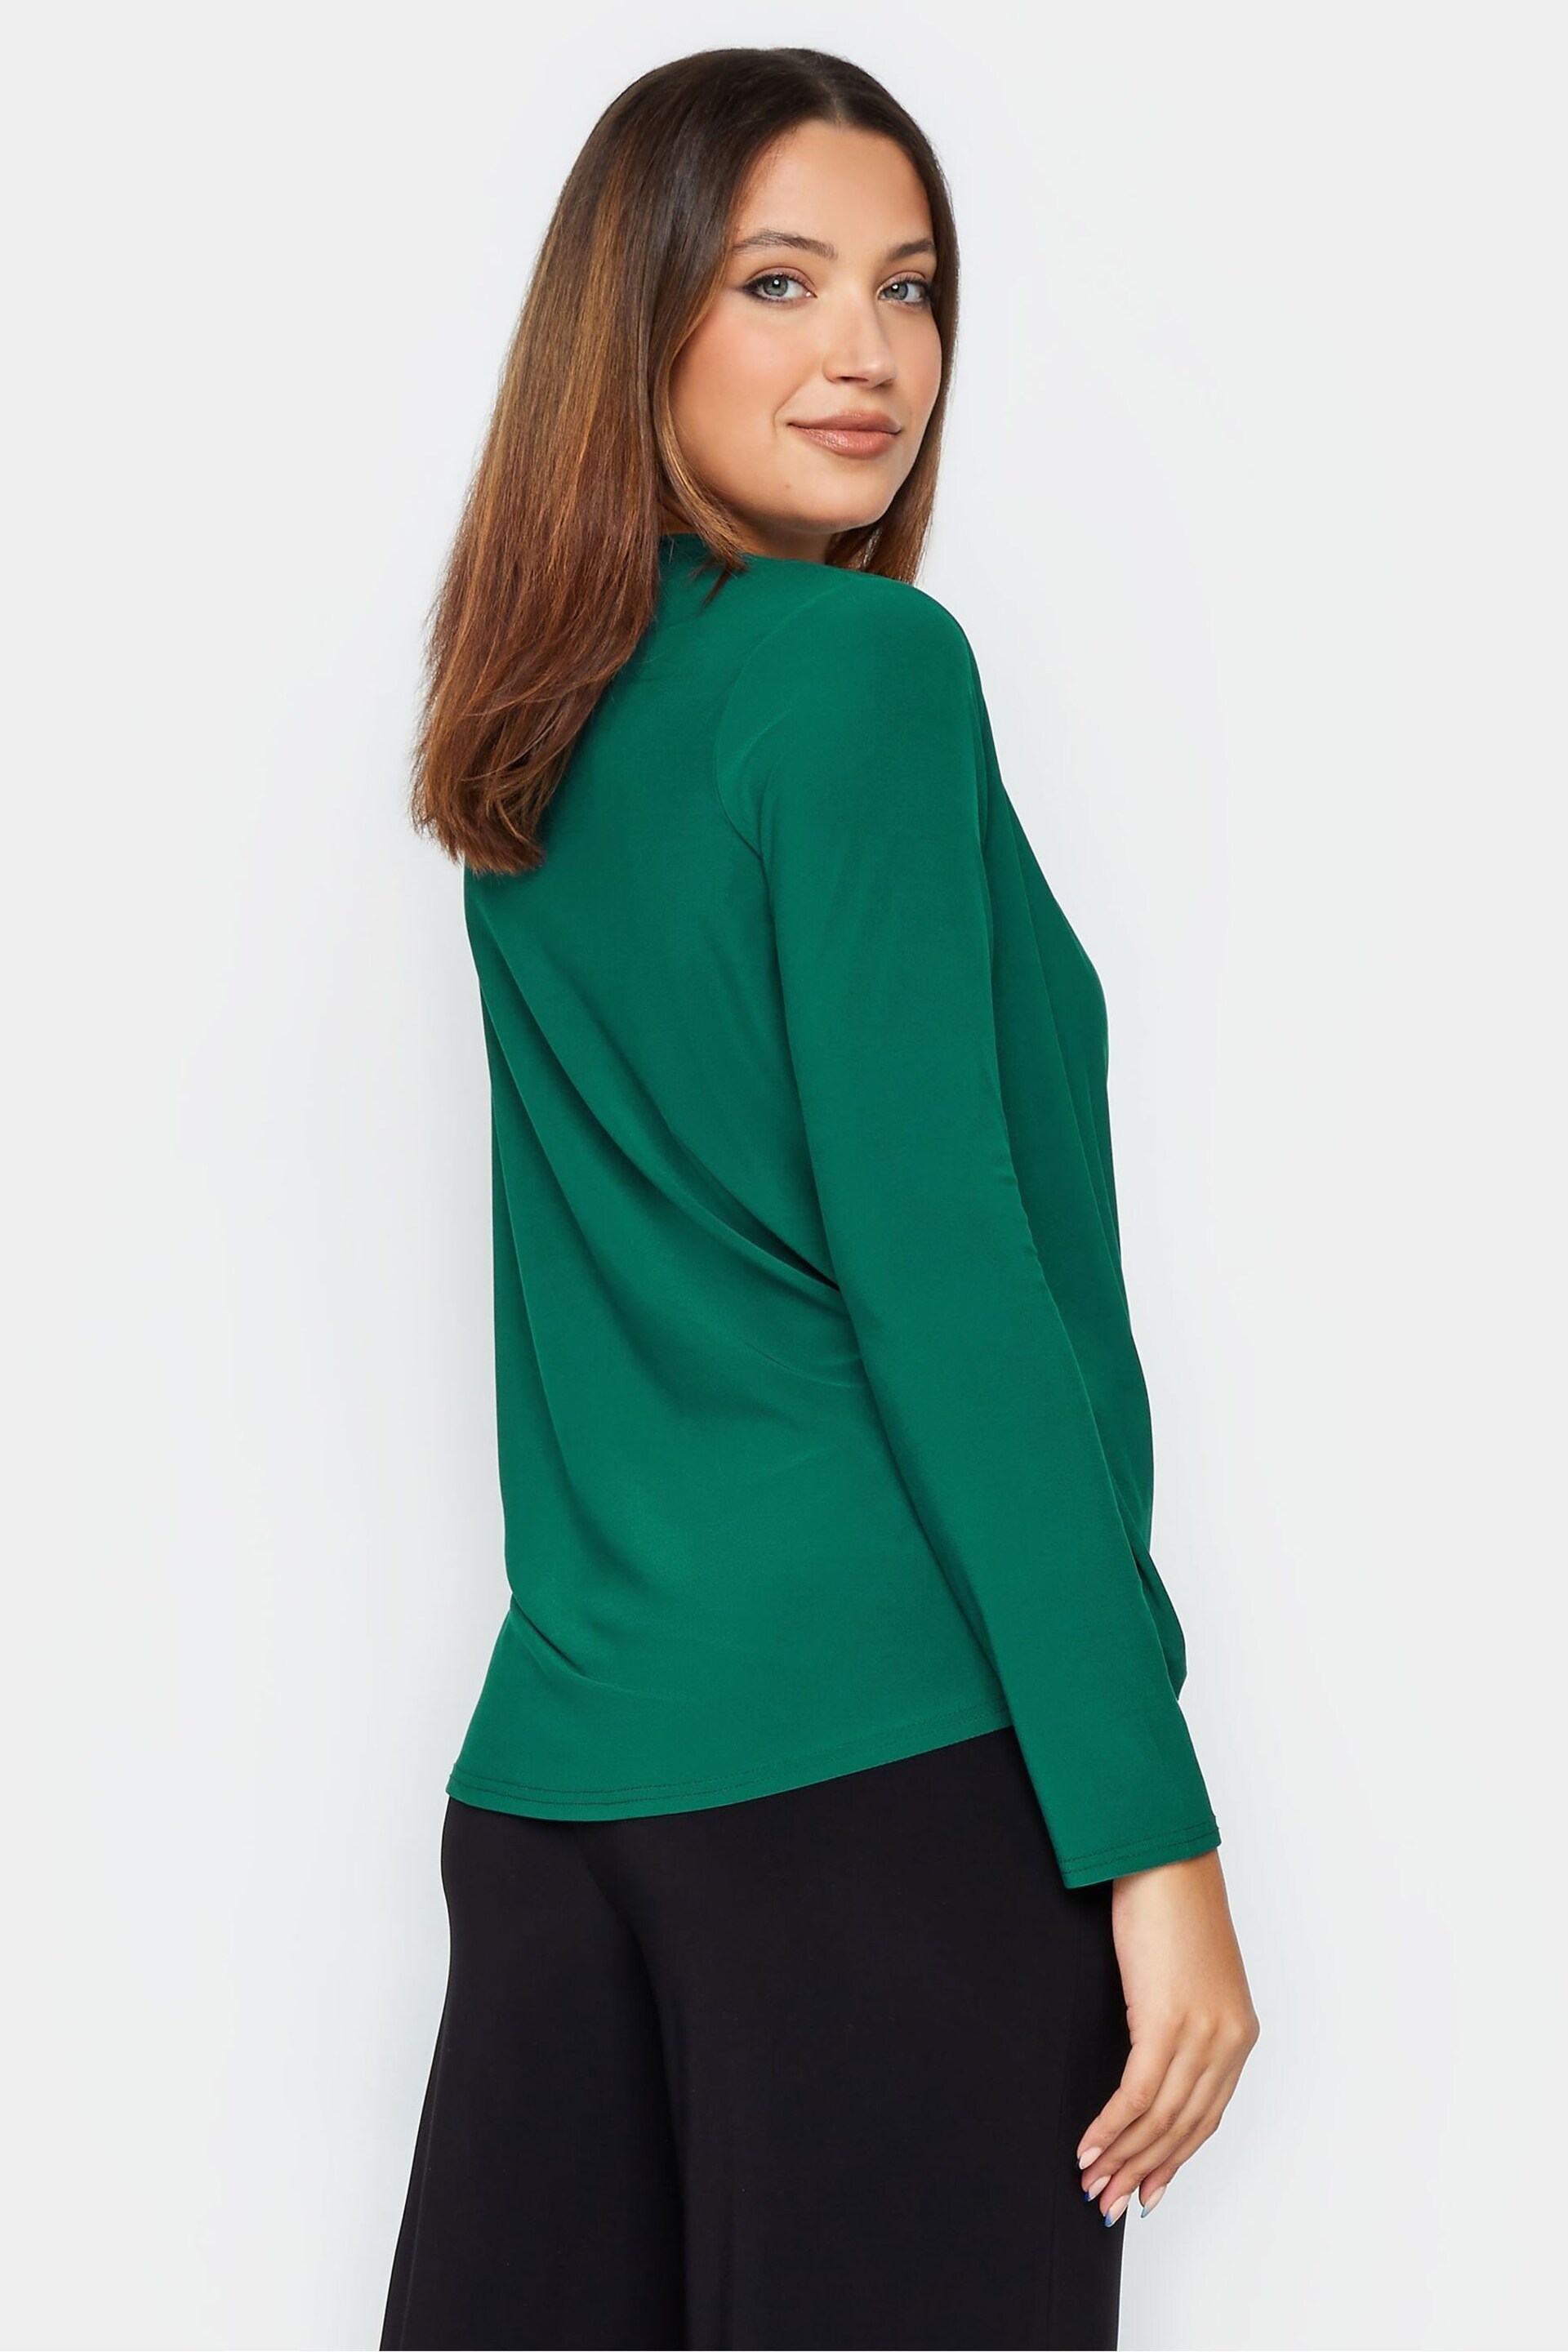 Long Tall Sally Green ITY Wrap Top - Image 3 of 4